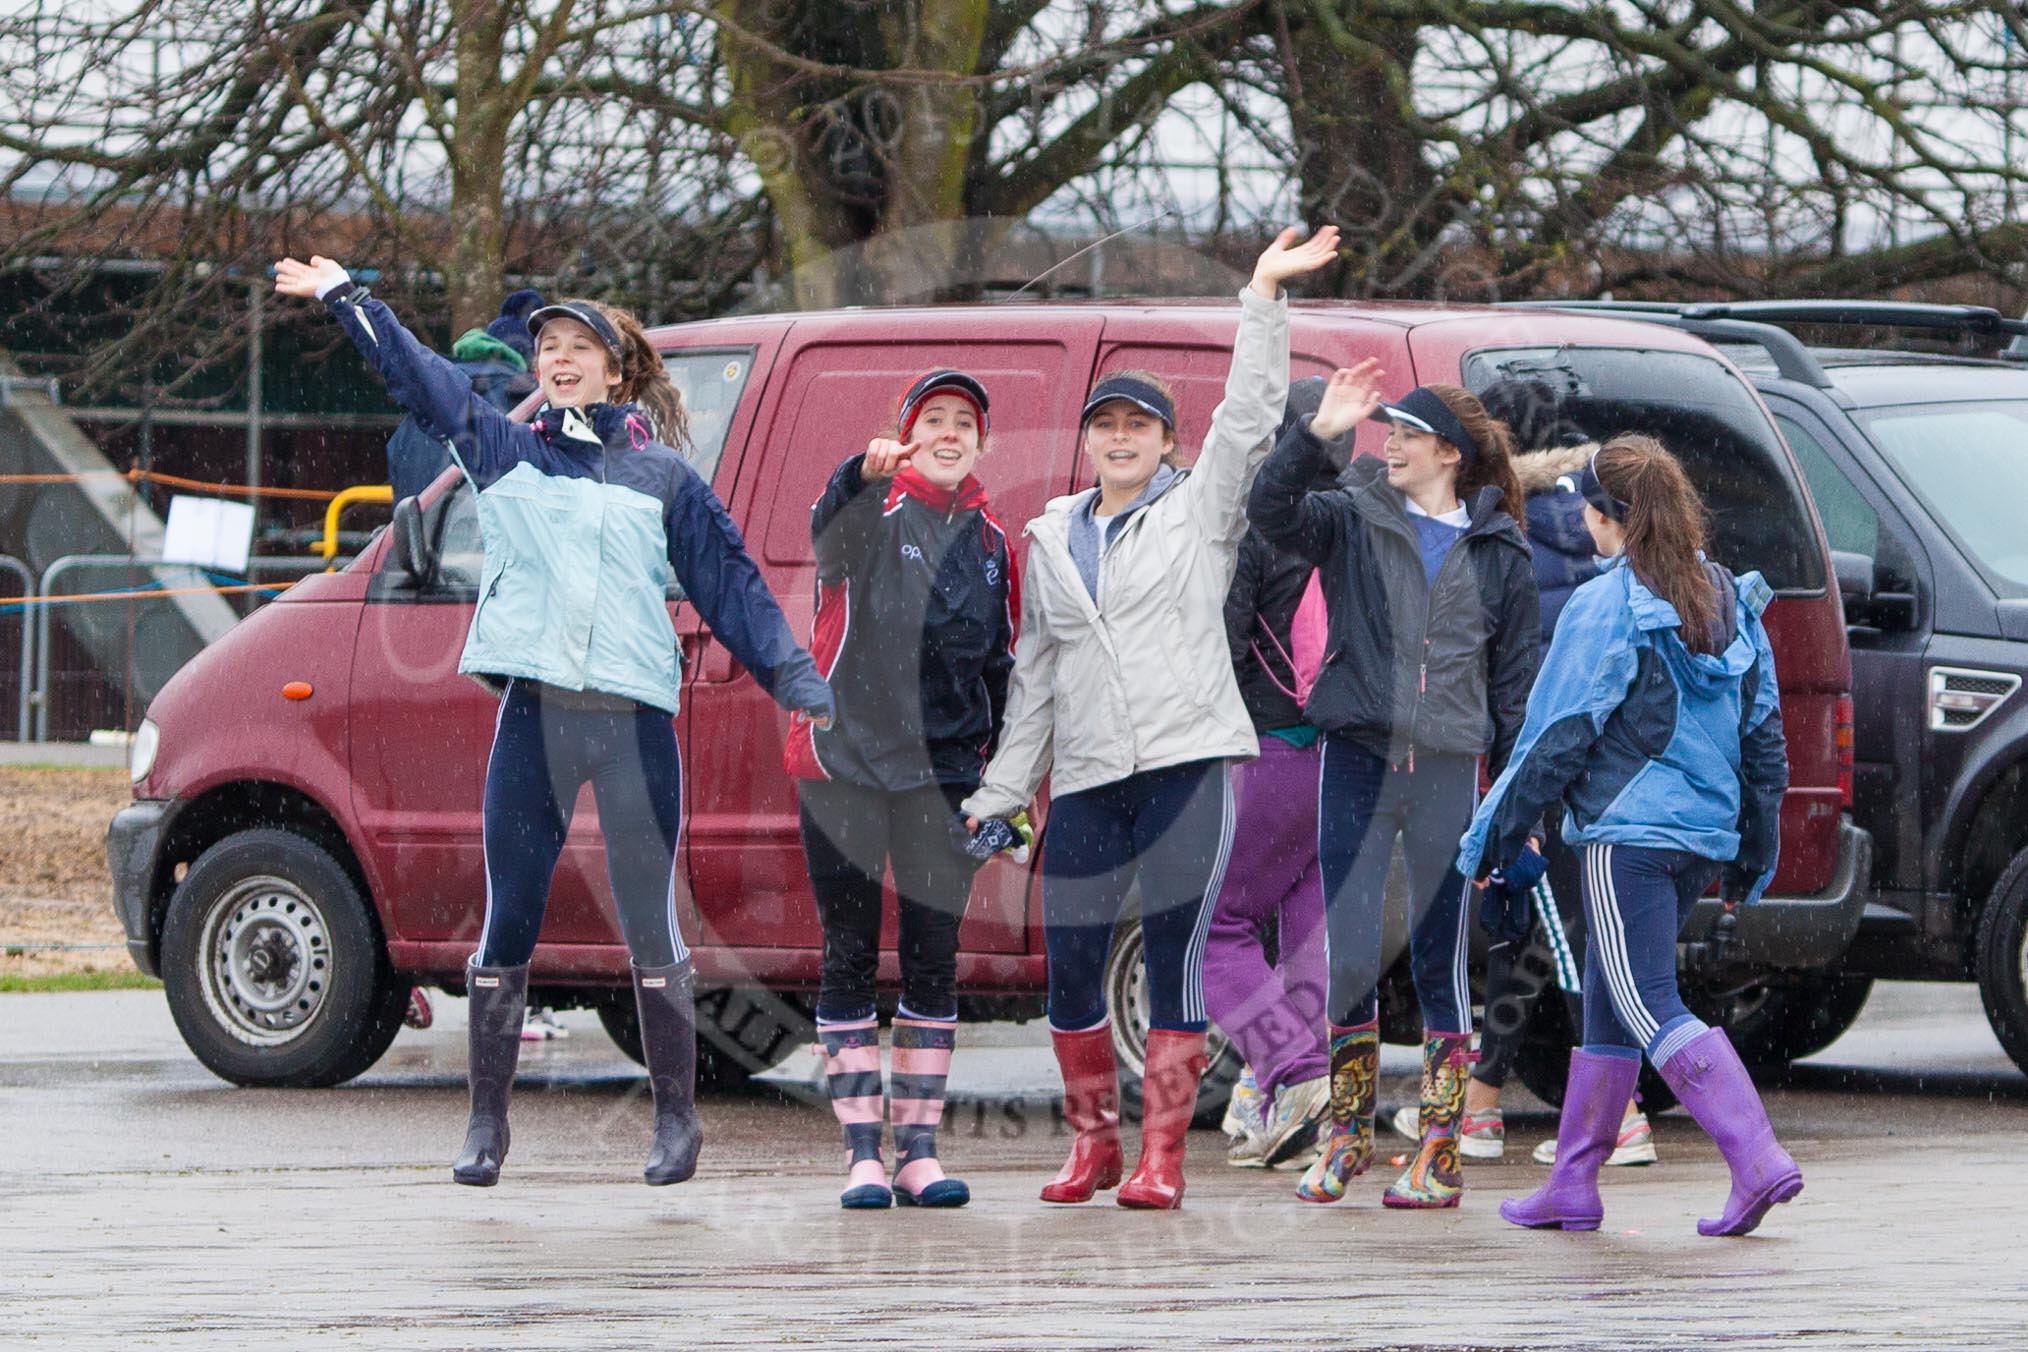 The Boat Race season 2013 - fixture OUWBC vs Olympians: Not siure who these waving young ladies are, but there enthusiasm, despite the pouring rain, was quite remarkable..
Dorney Lake,
Dorney, Windsor,
Buckinghamshire,
United Kingdom,
on 16 March 2013 at 11:12, image #45